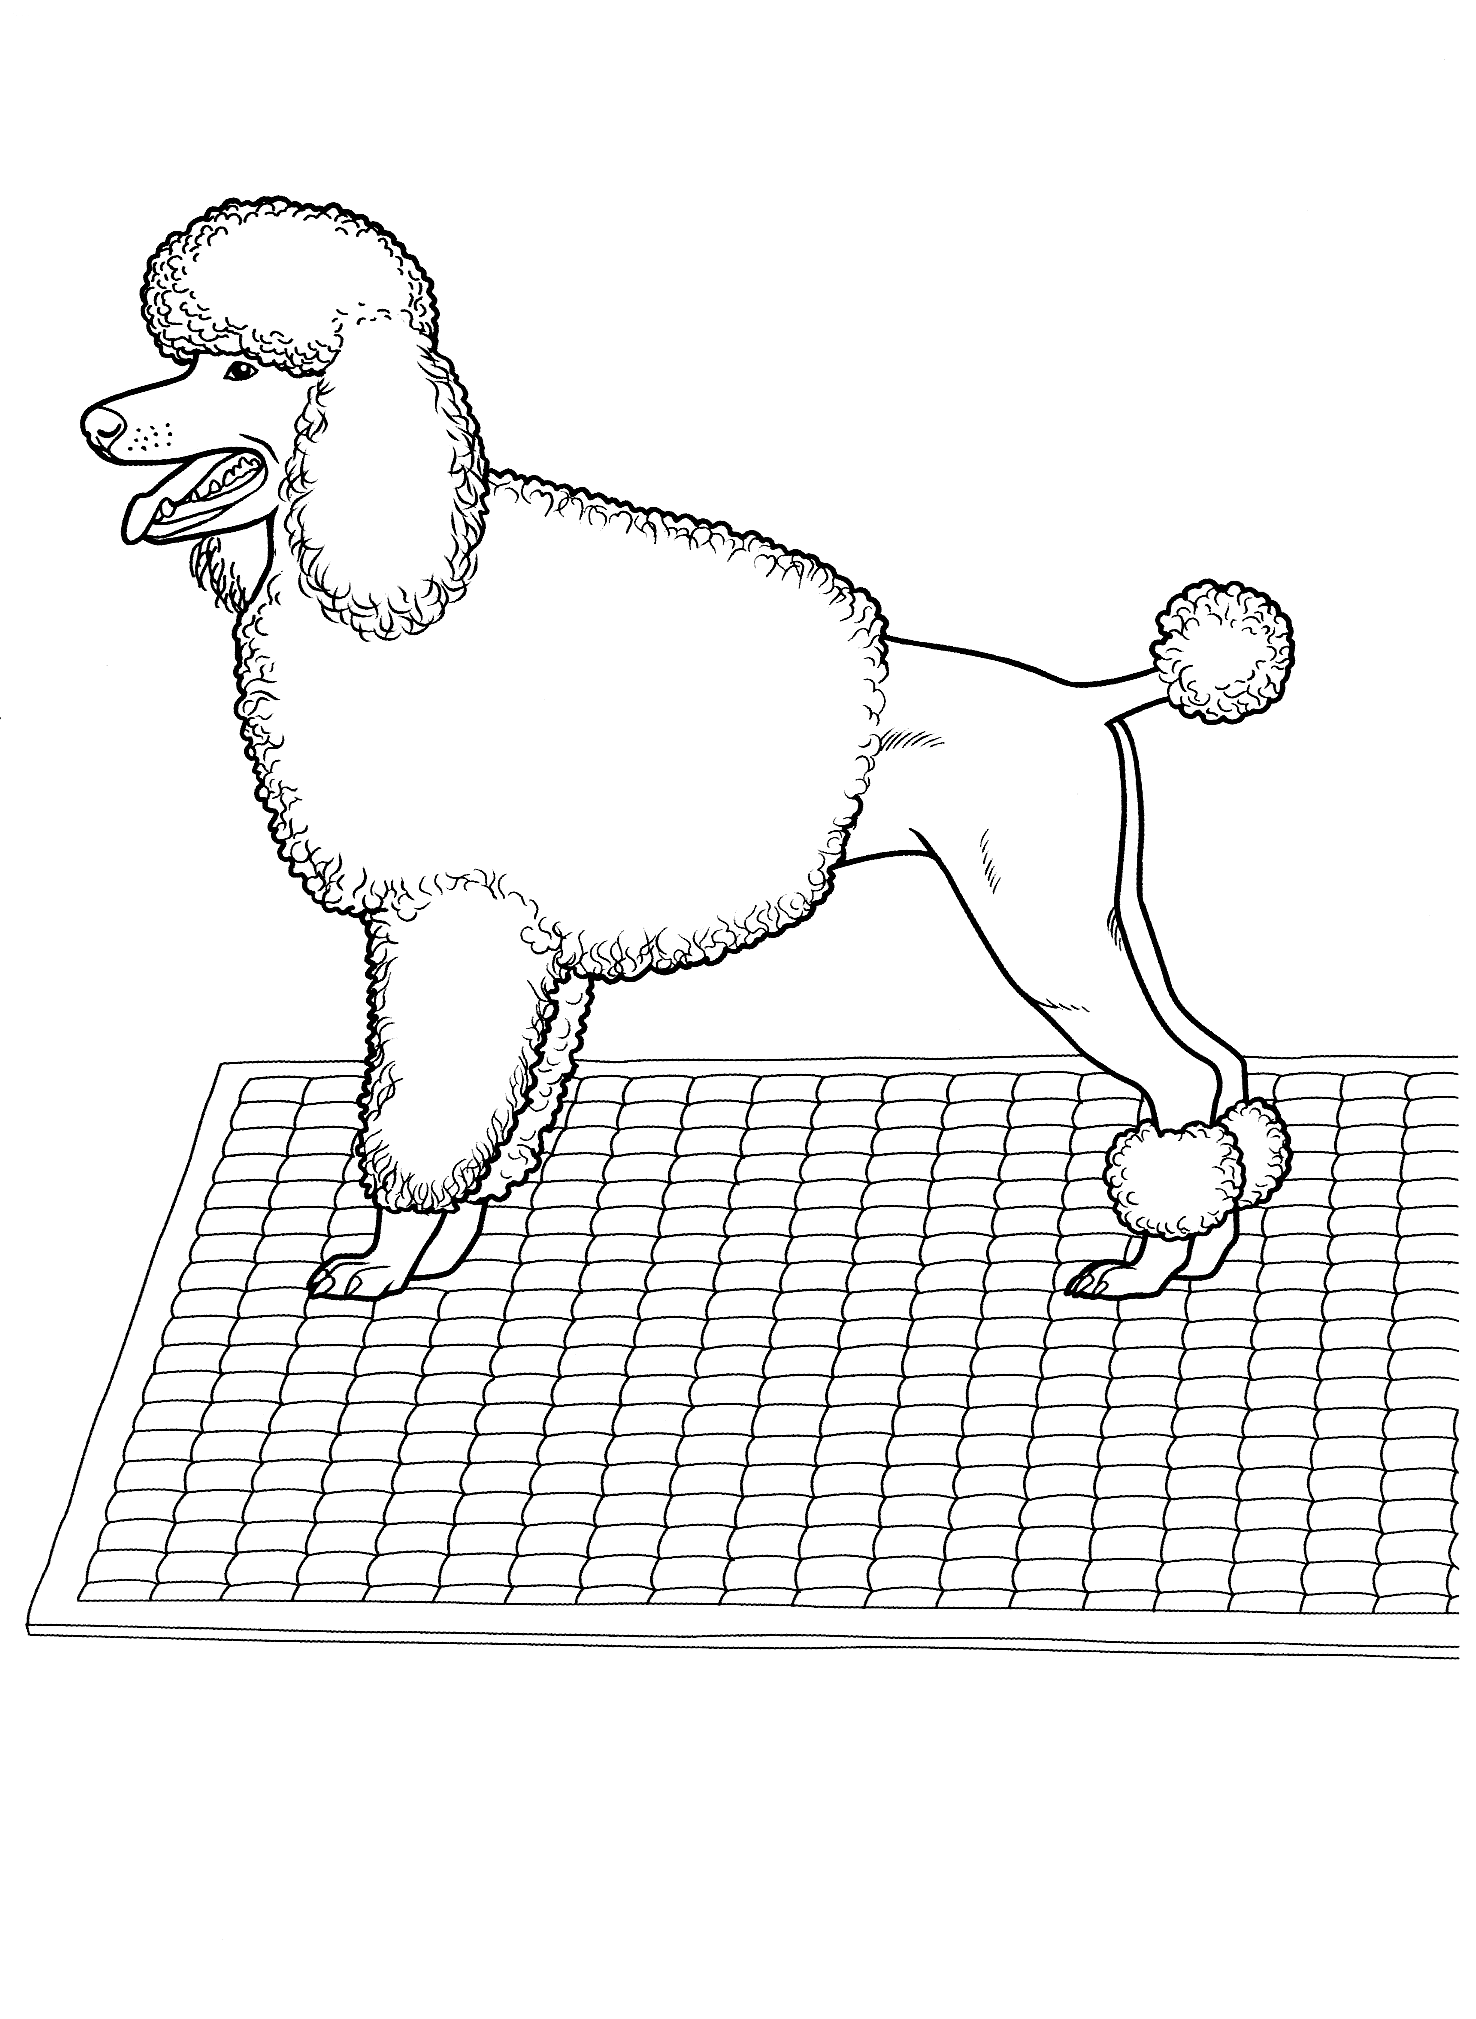 Coloring page - Poodle